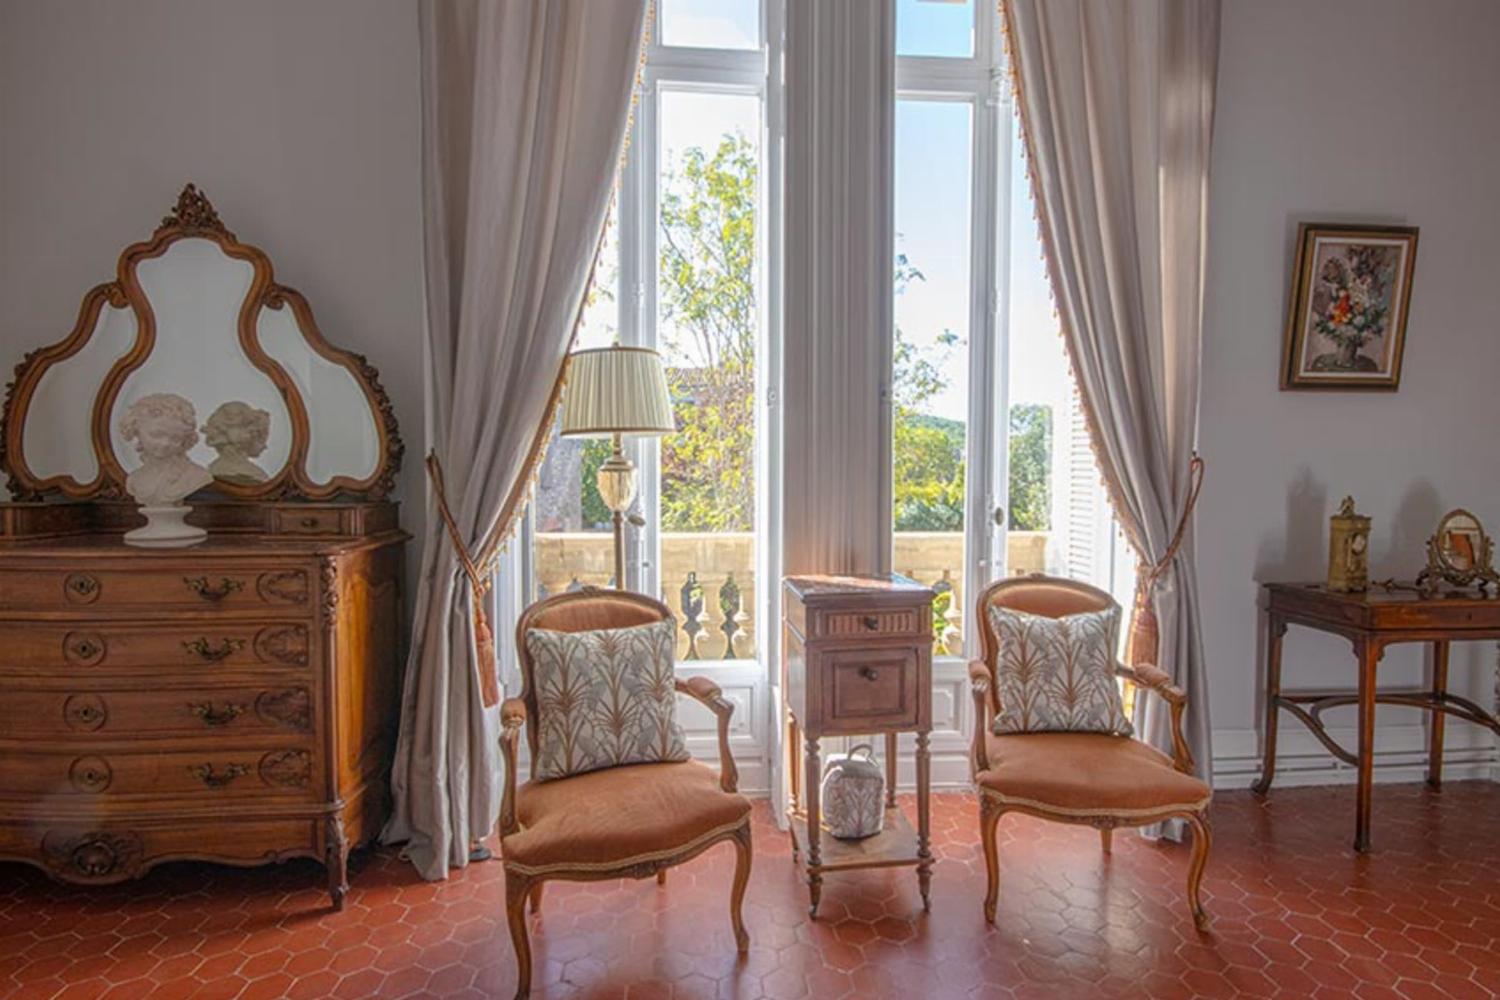 Bedroom | Holiday château in South of France